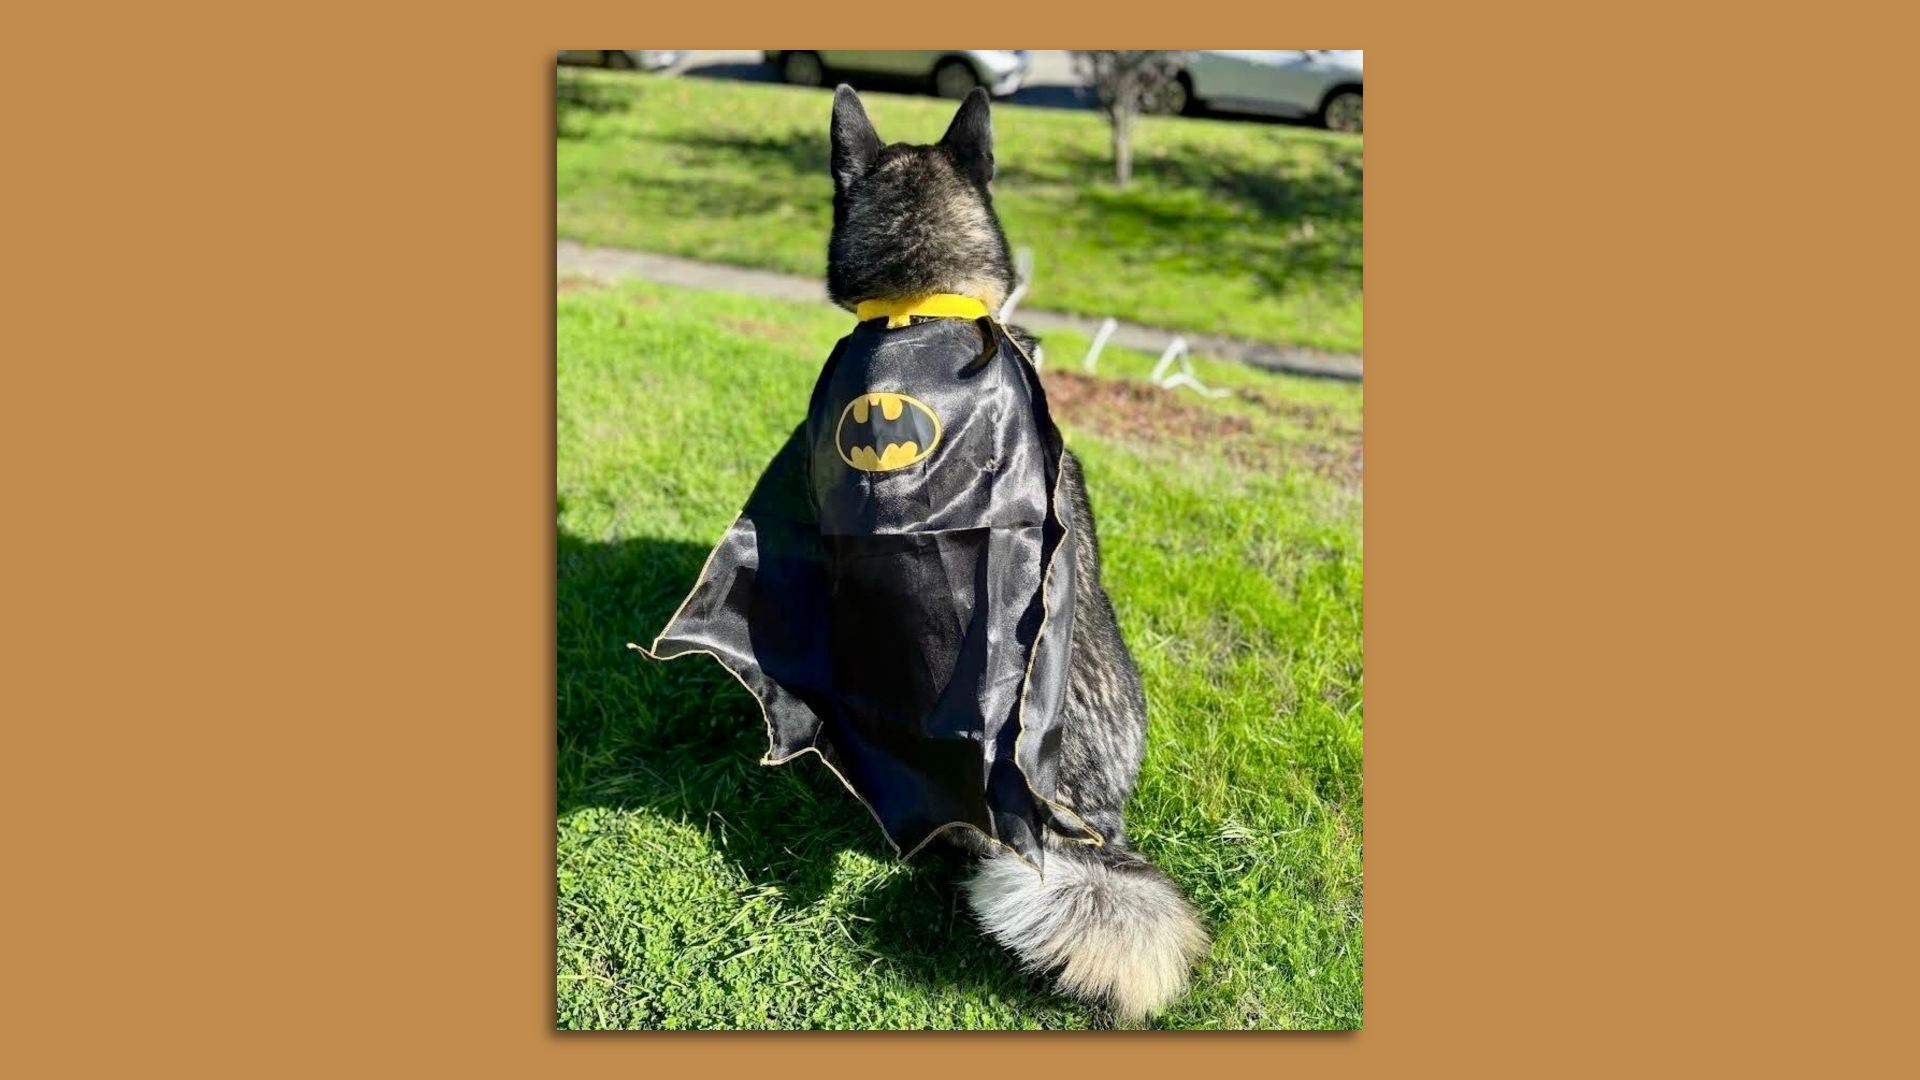 A dog with black and whitish gray fur and pointy ears is shown from behind, wearing a Batman cape.